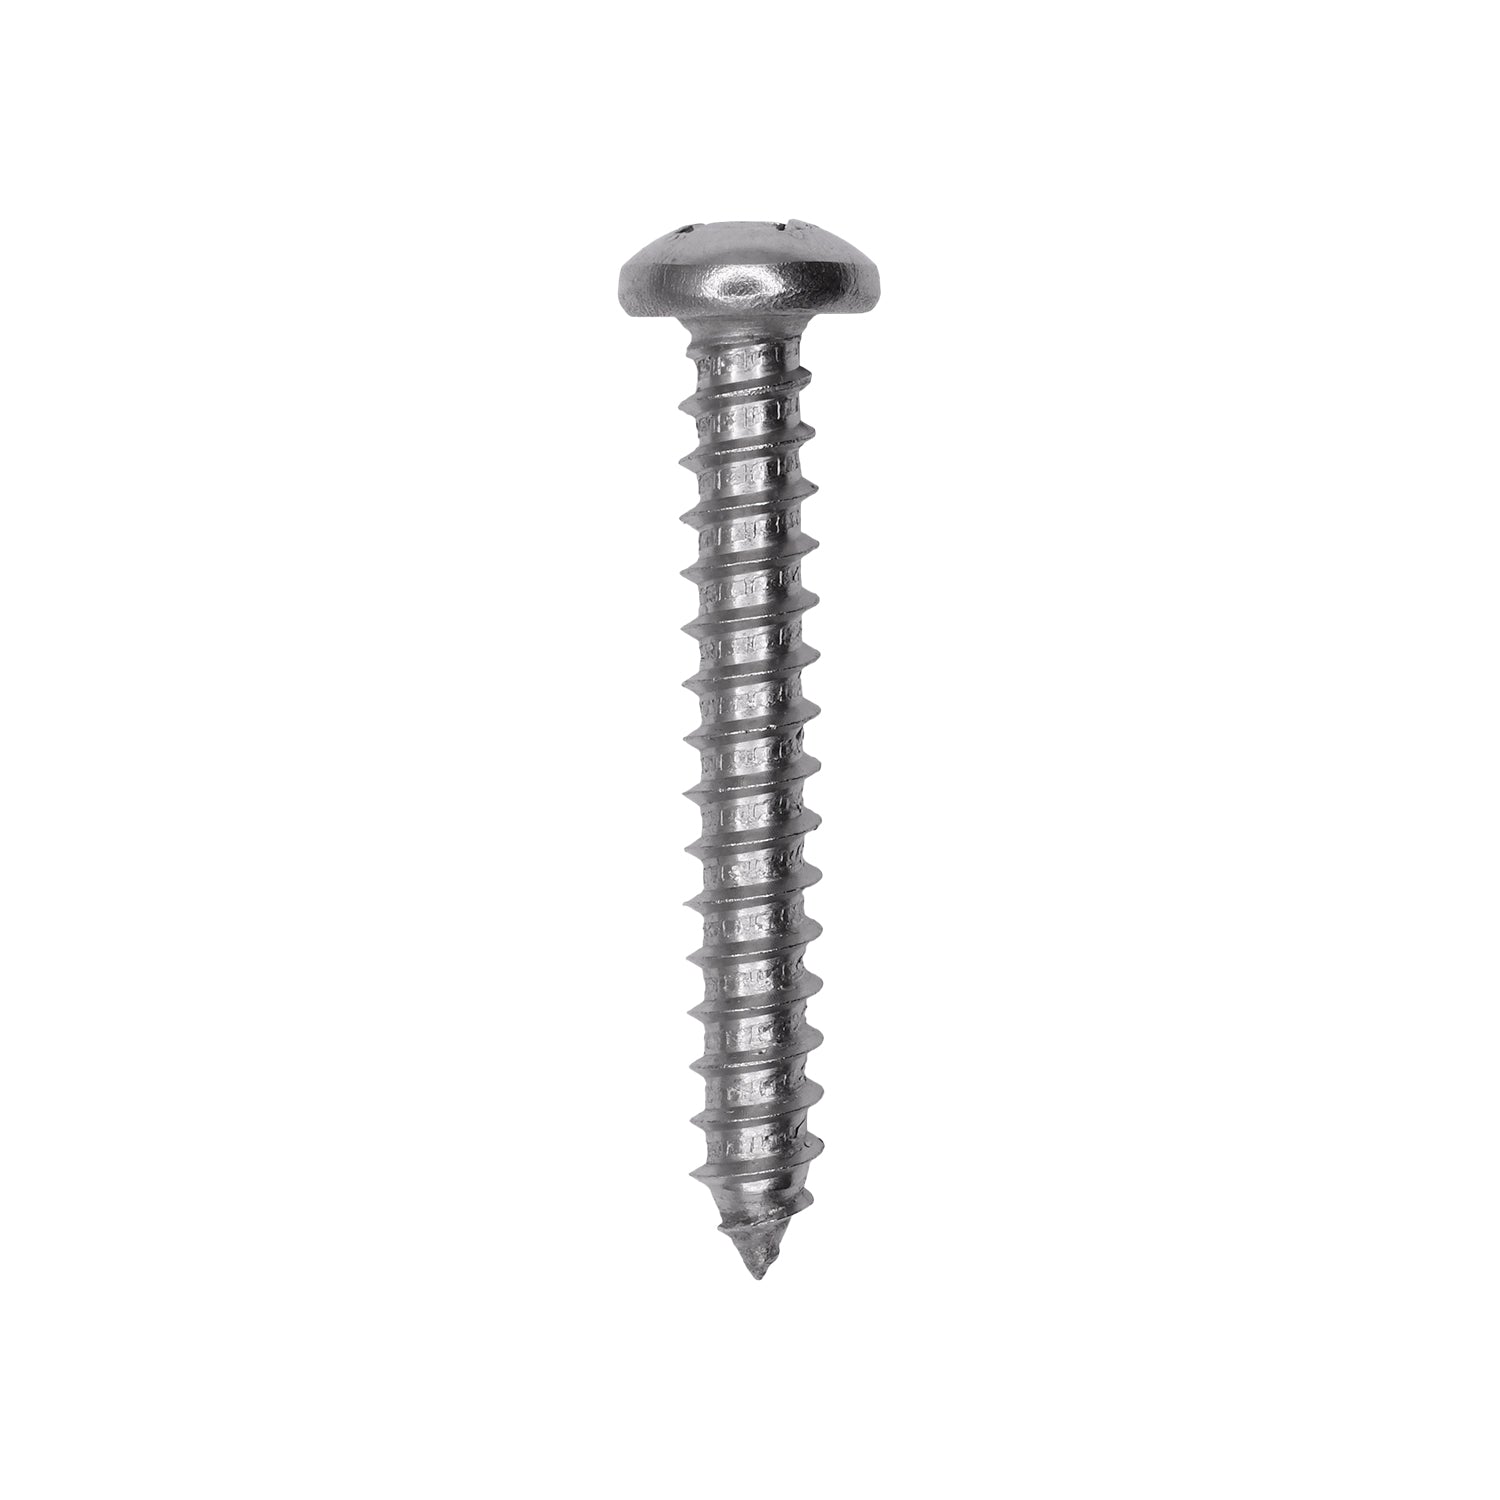 Auveco # 25608 #14 X 1-3/4. 18-8 Stainless Phillips Pan Head Tapping Screw Qty. 25